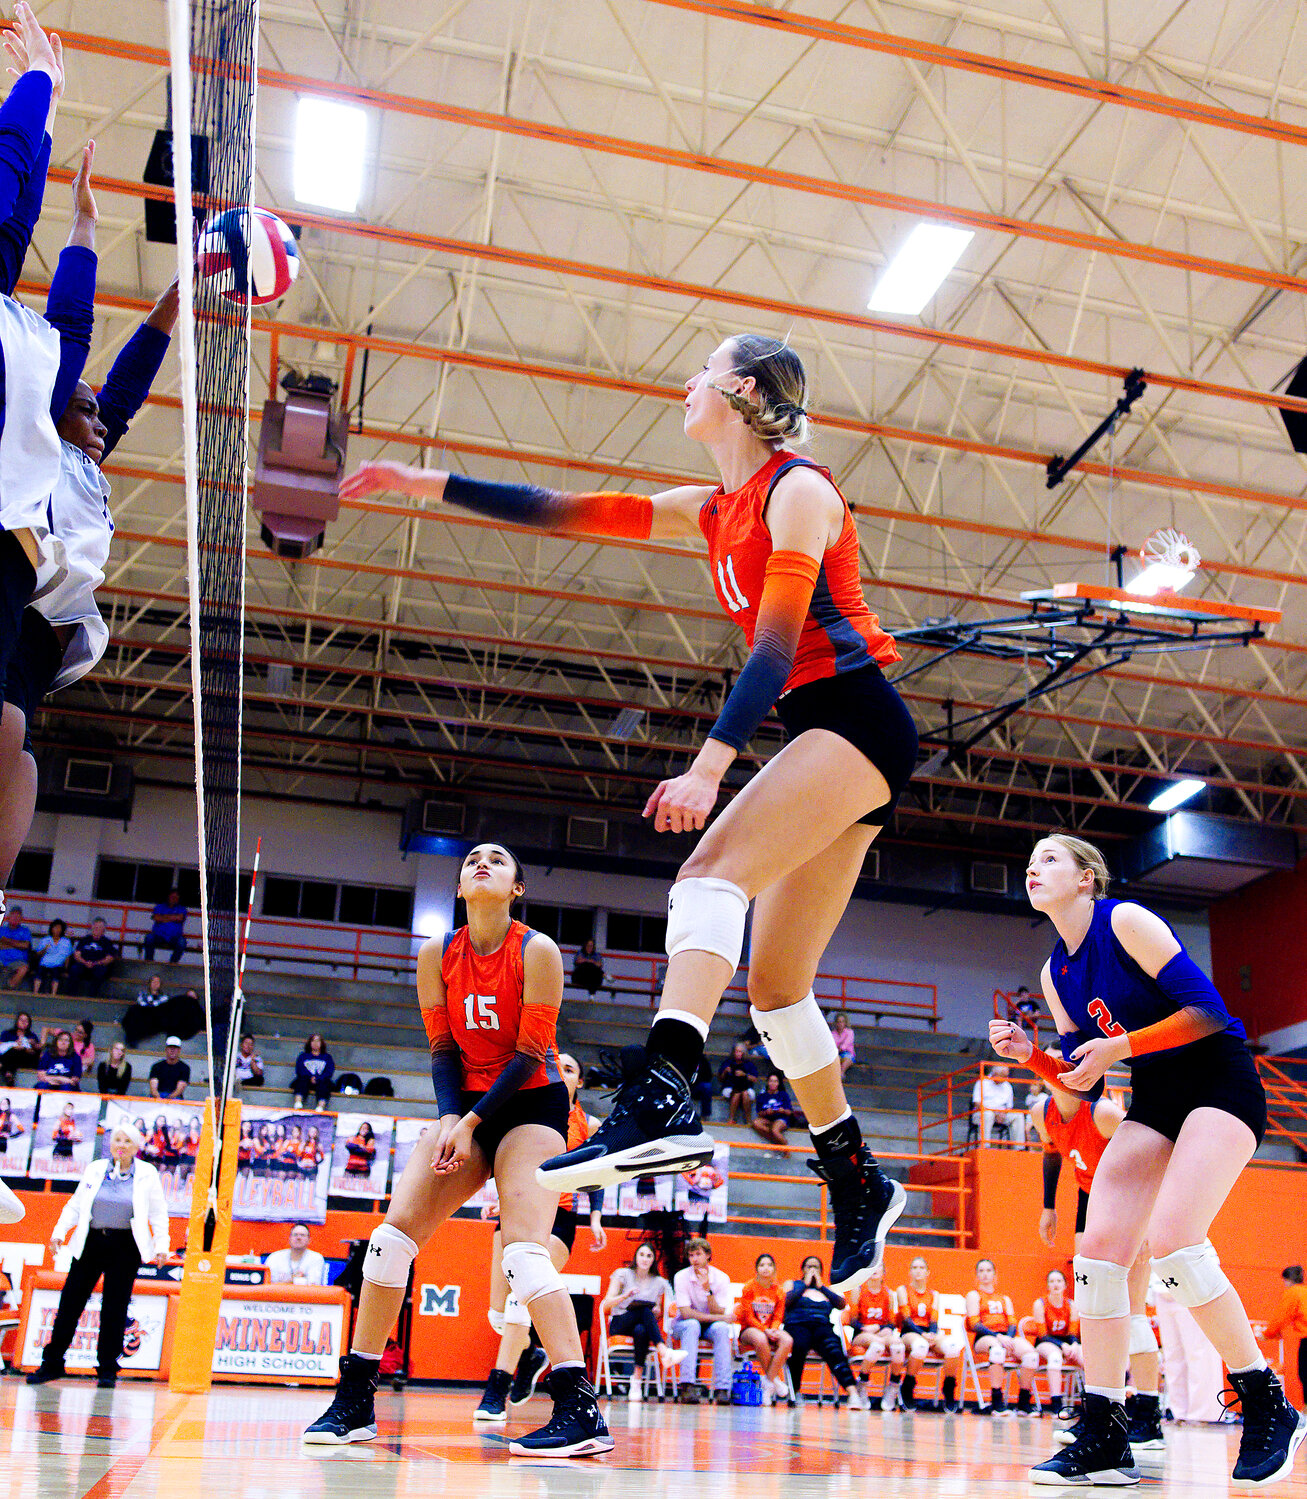 Olivia Hughes sends the ball over the net toward Mt. Vernon. [view more volleyball]